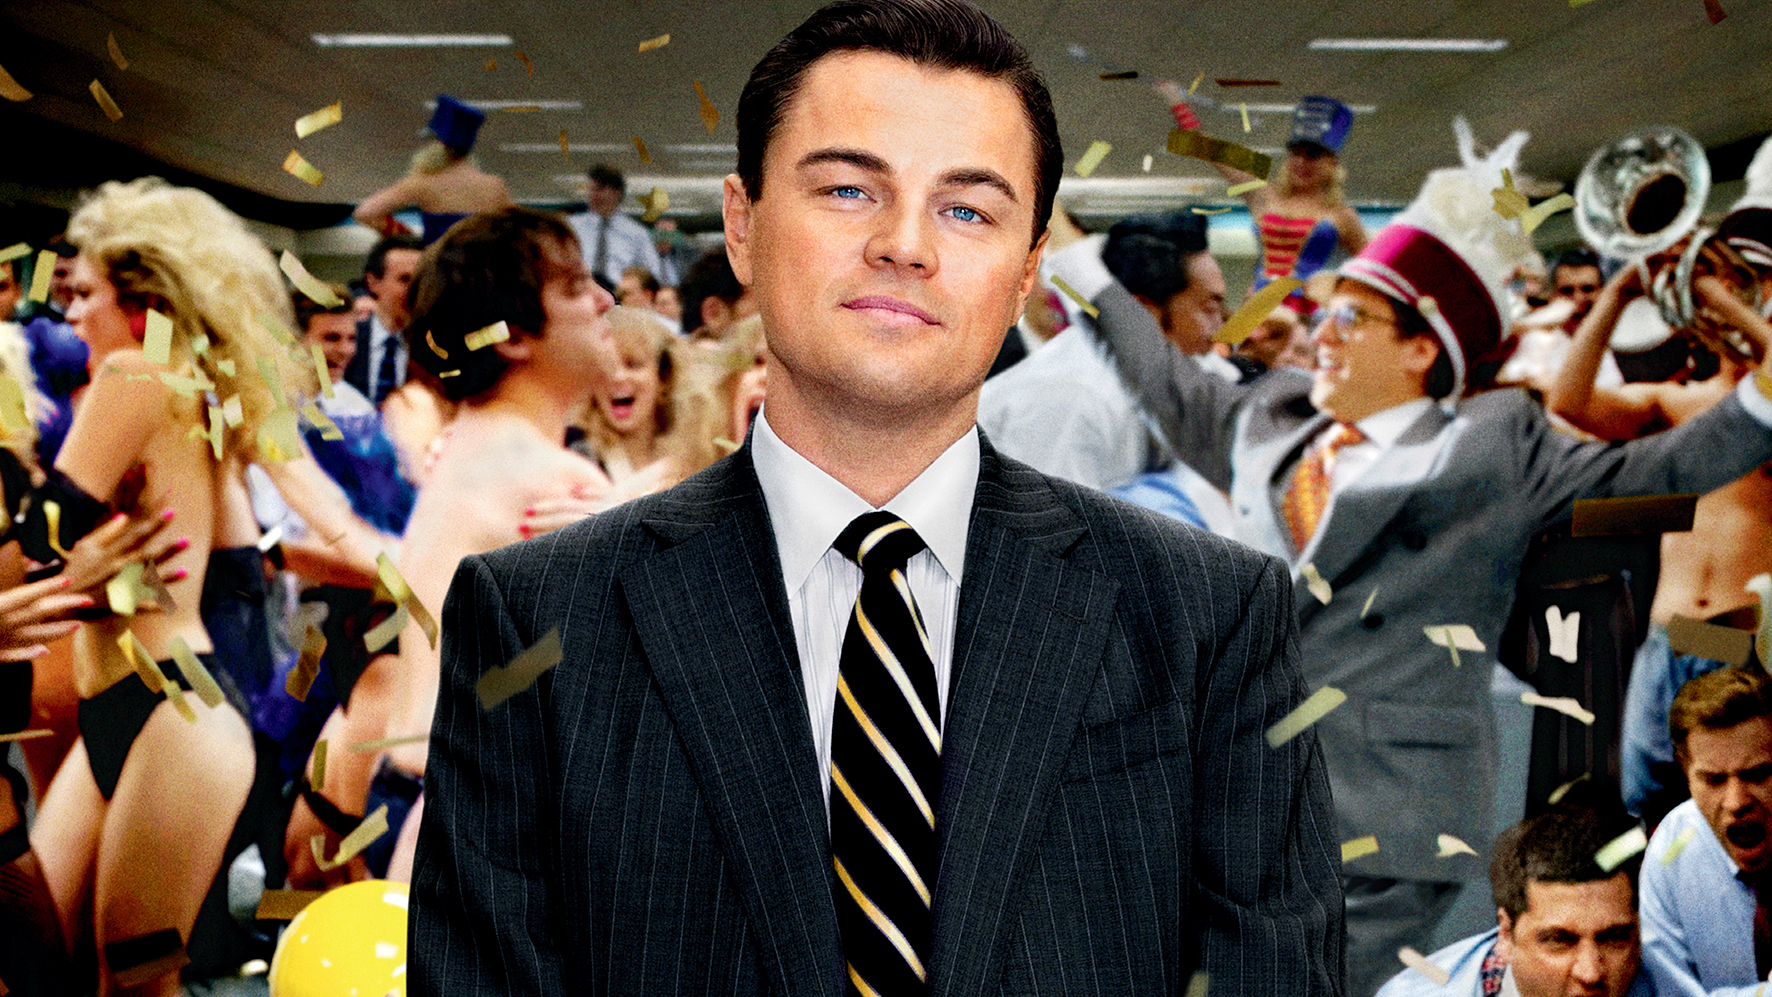 How To Watch The Wolf Of Wall Street On Netflix Form Anywhere In The World [June 2022]